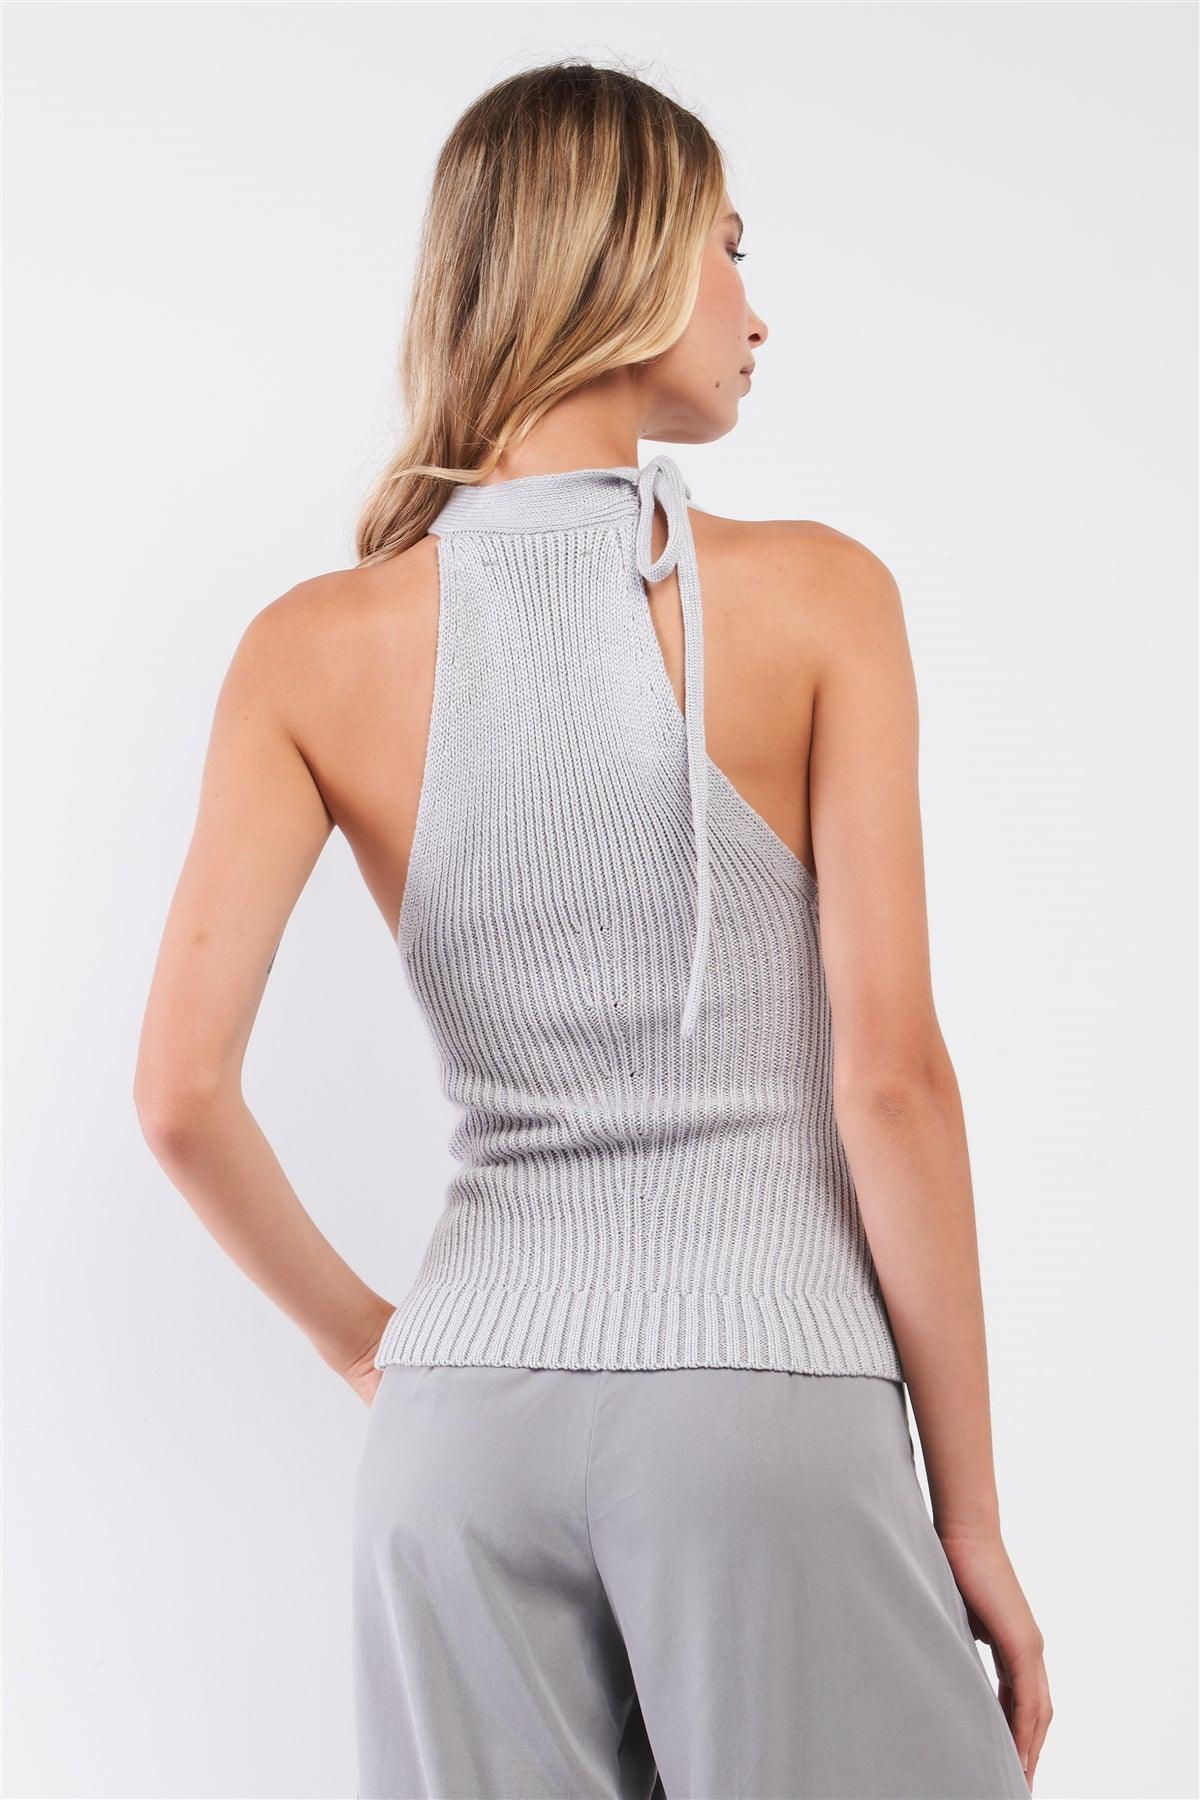 Silver Grey High Neck With Self-Tie Detail On The Side Sleeveless Ribbed Knit Top /3-2-1